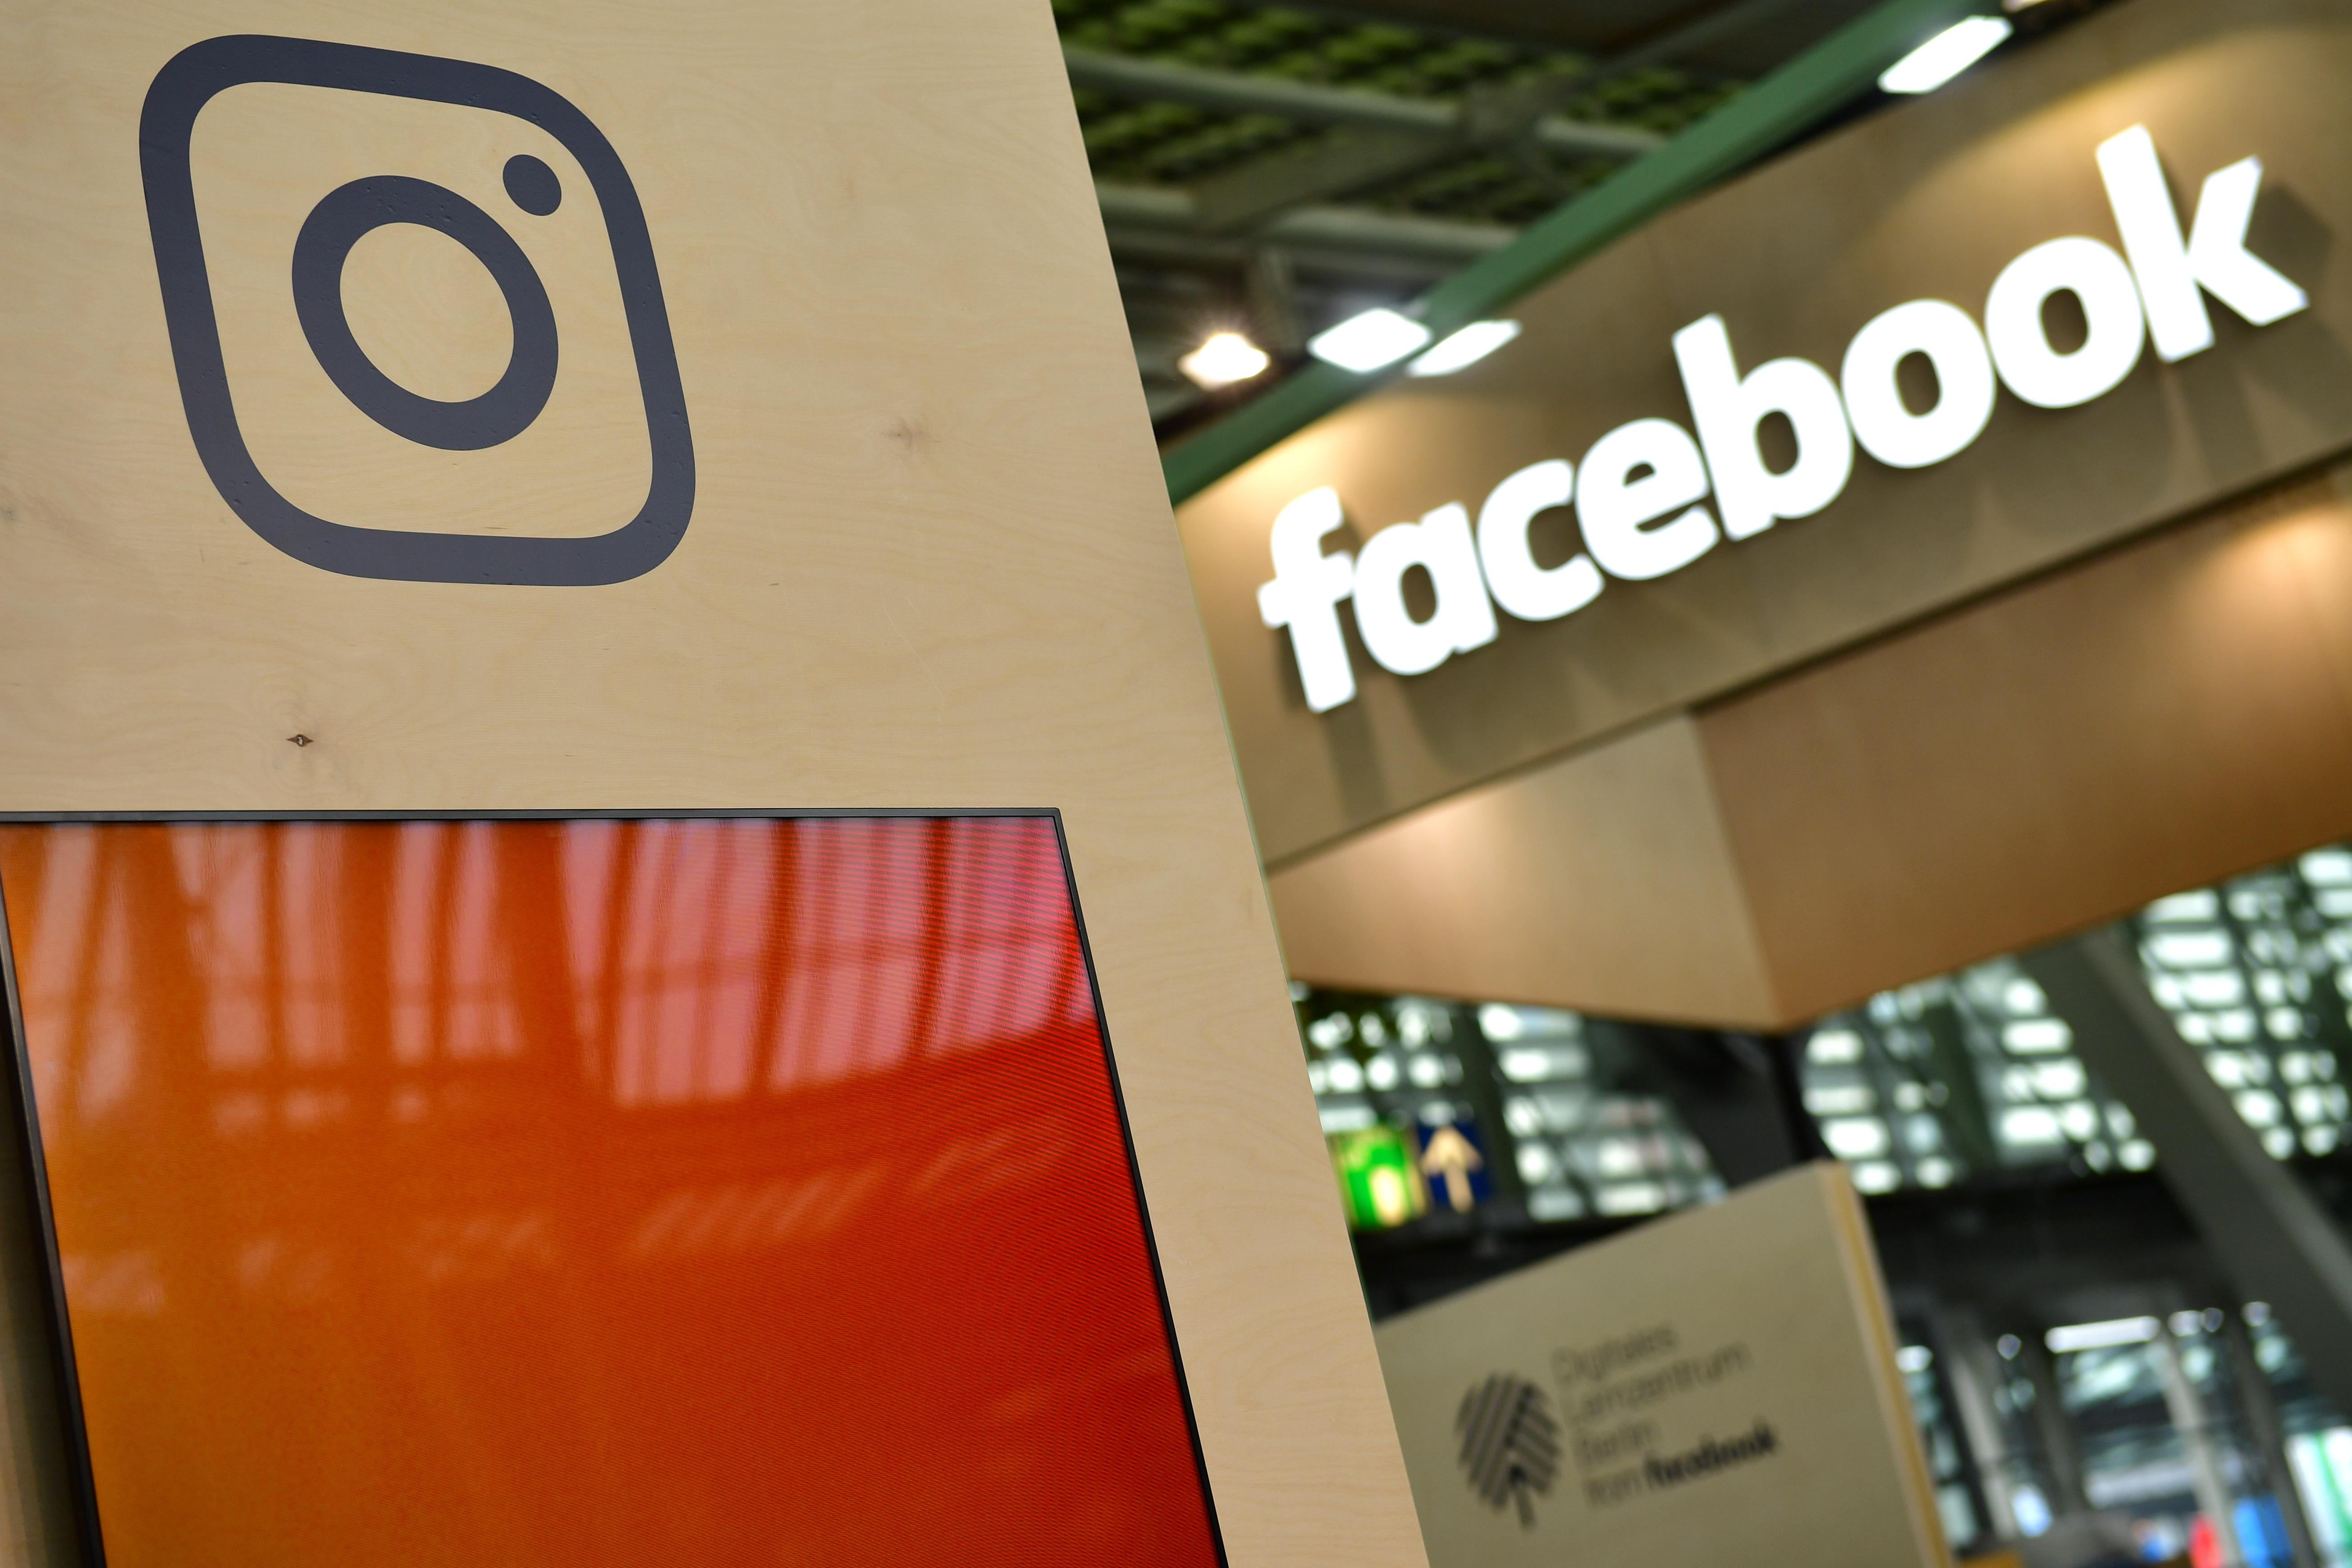 User reports suggest that Facebook and Instagram have been struggling with outages. 